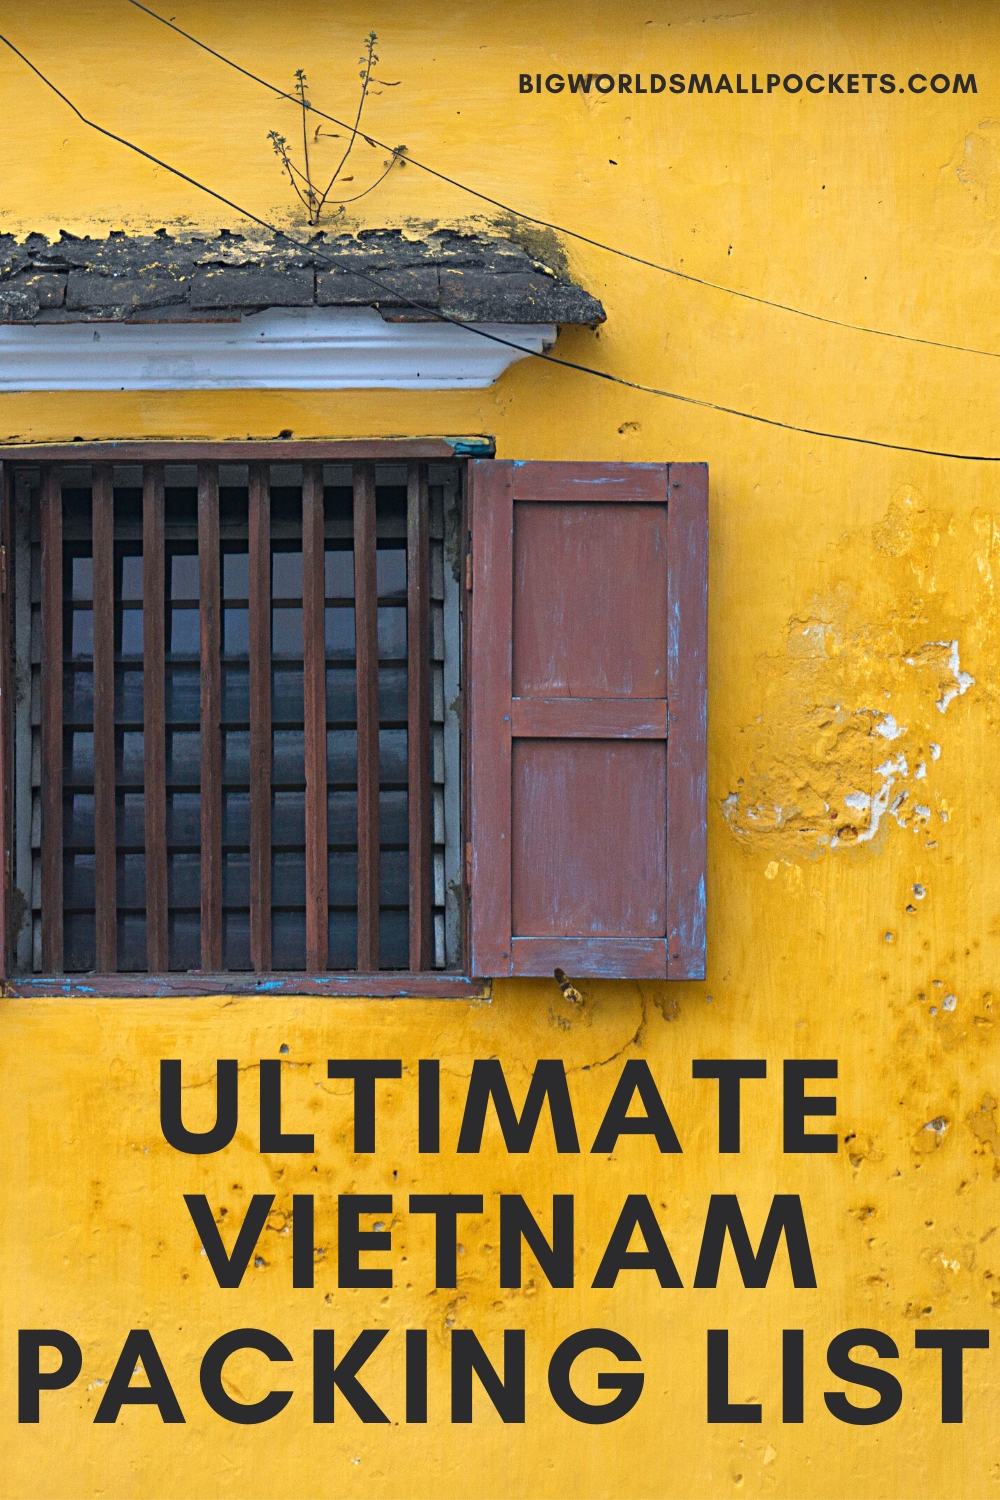 The Ultimate Vietnam Packing List